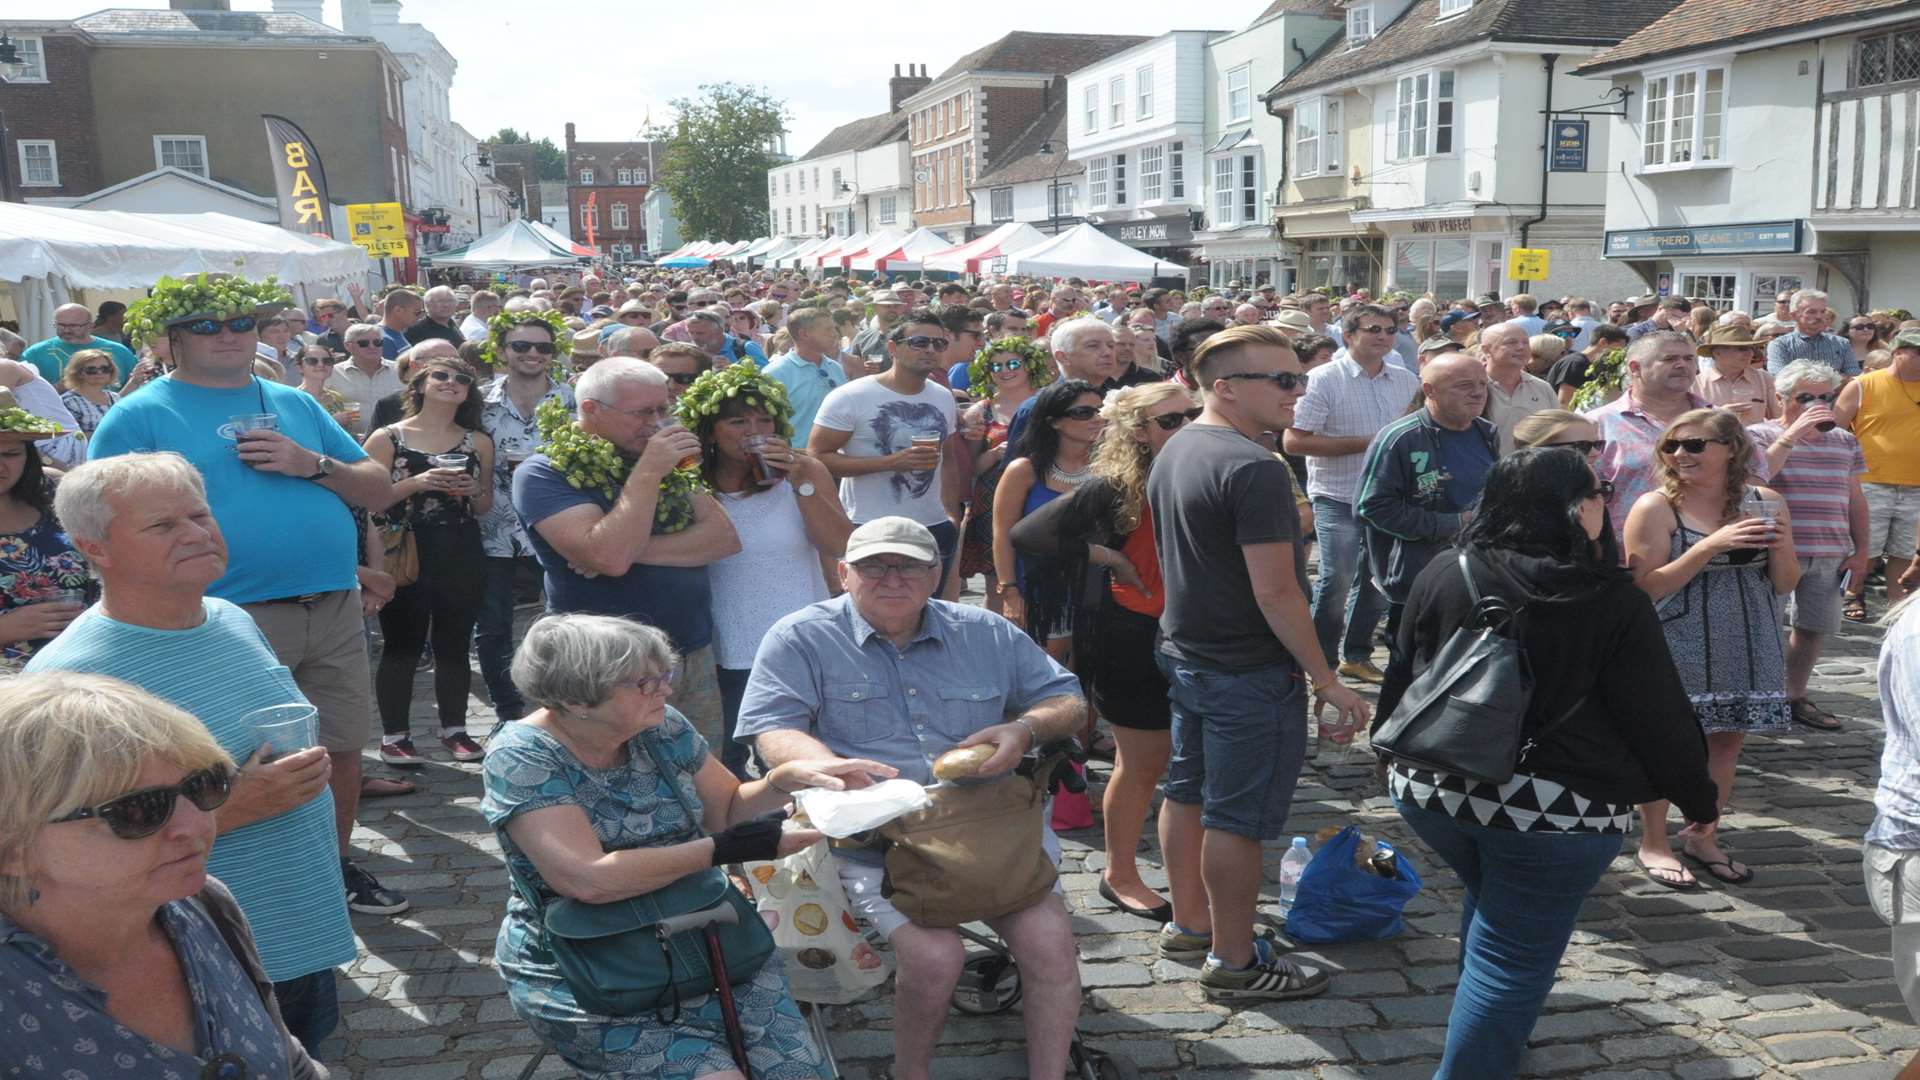 Big crowds are expected to return to Faversham over the next two days.